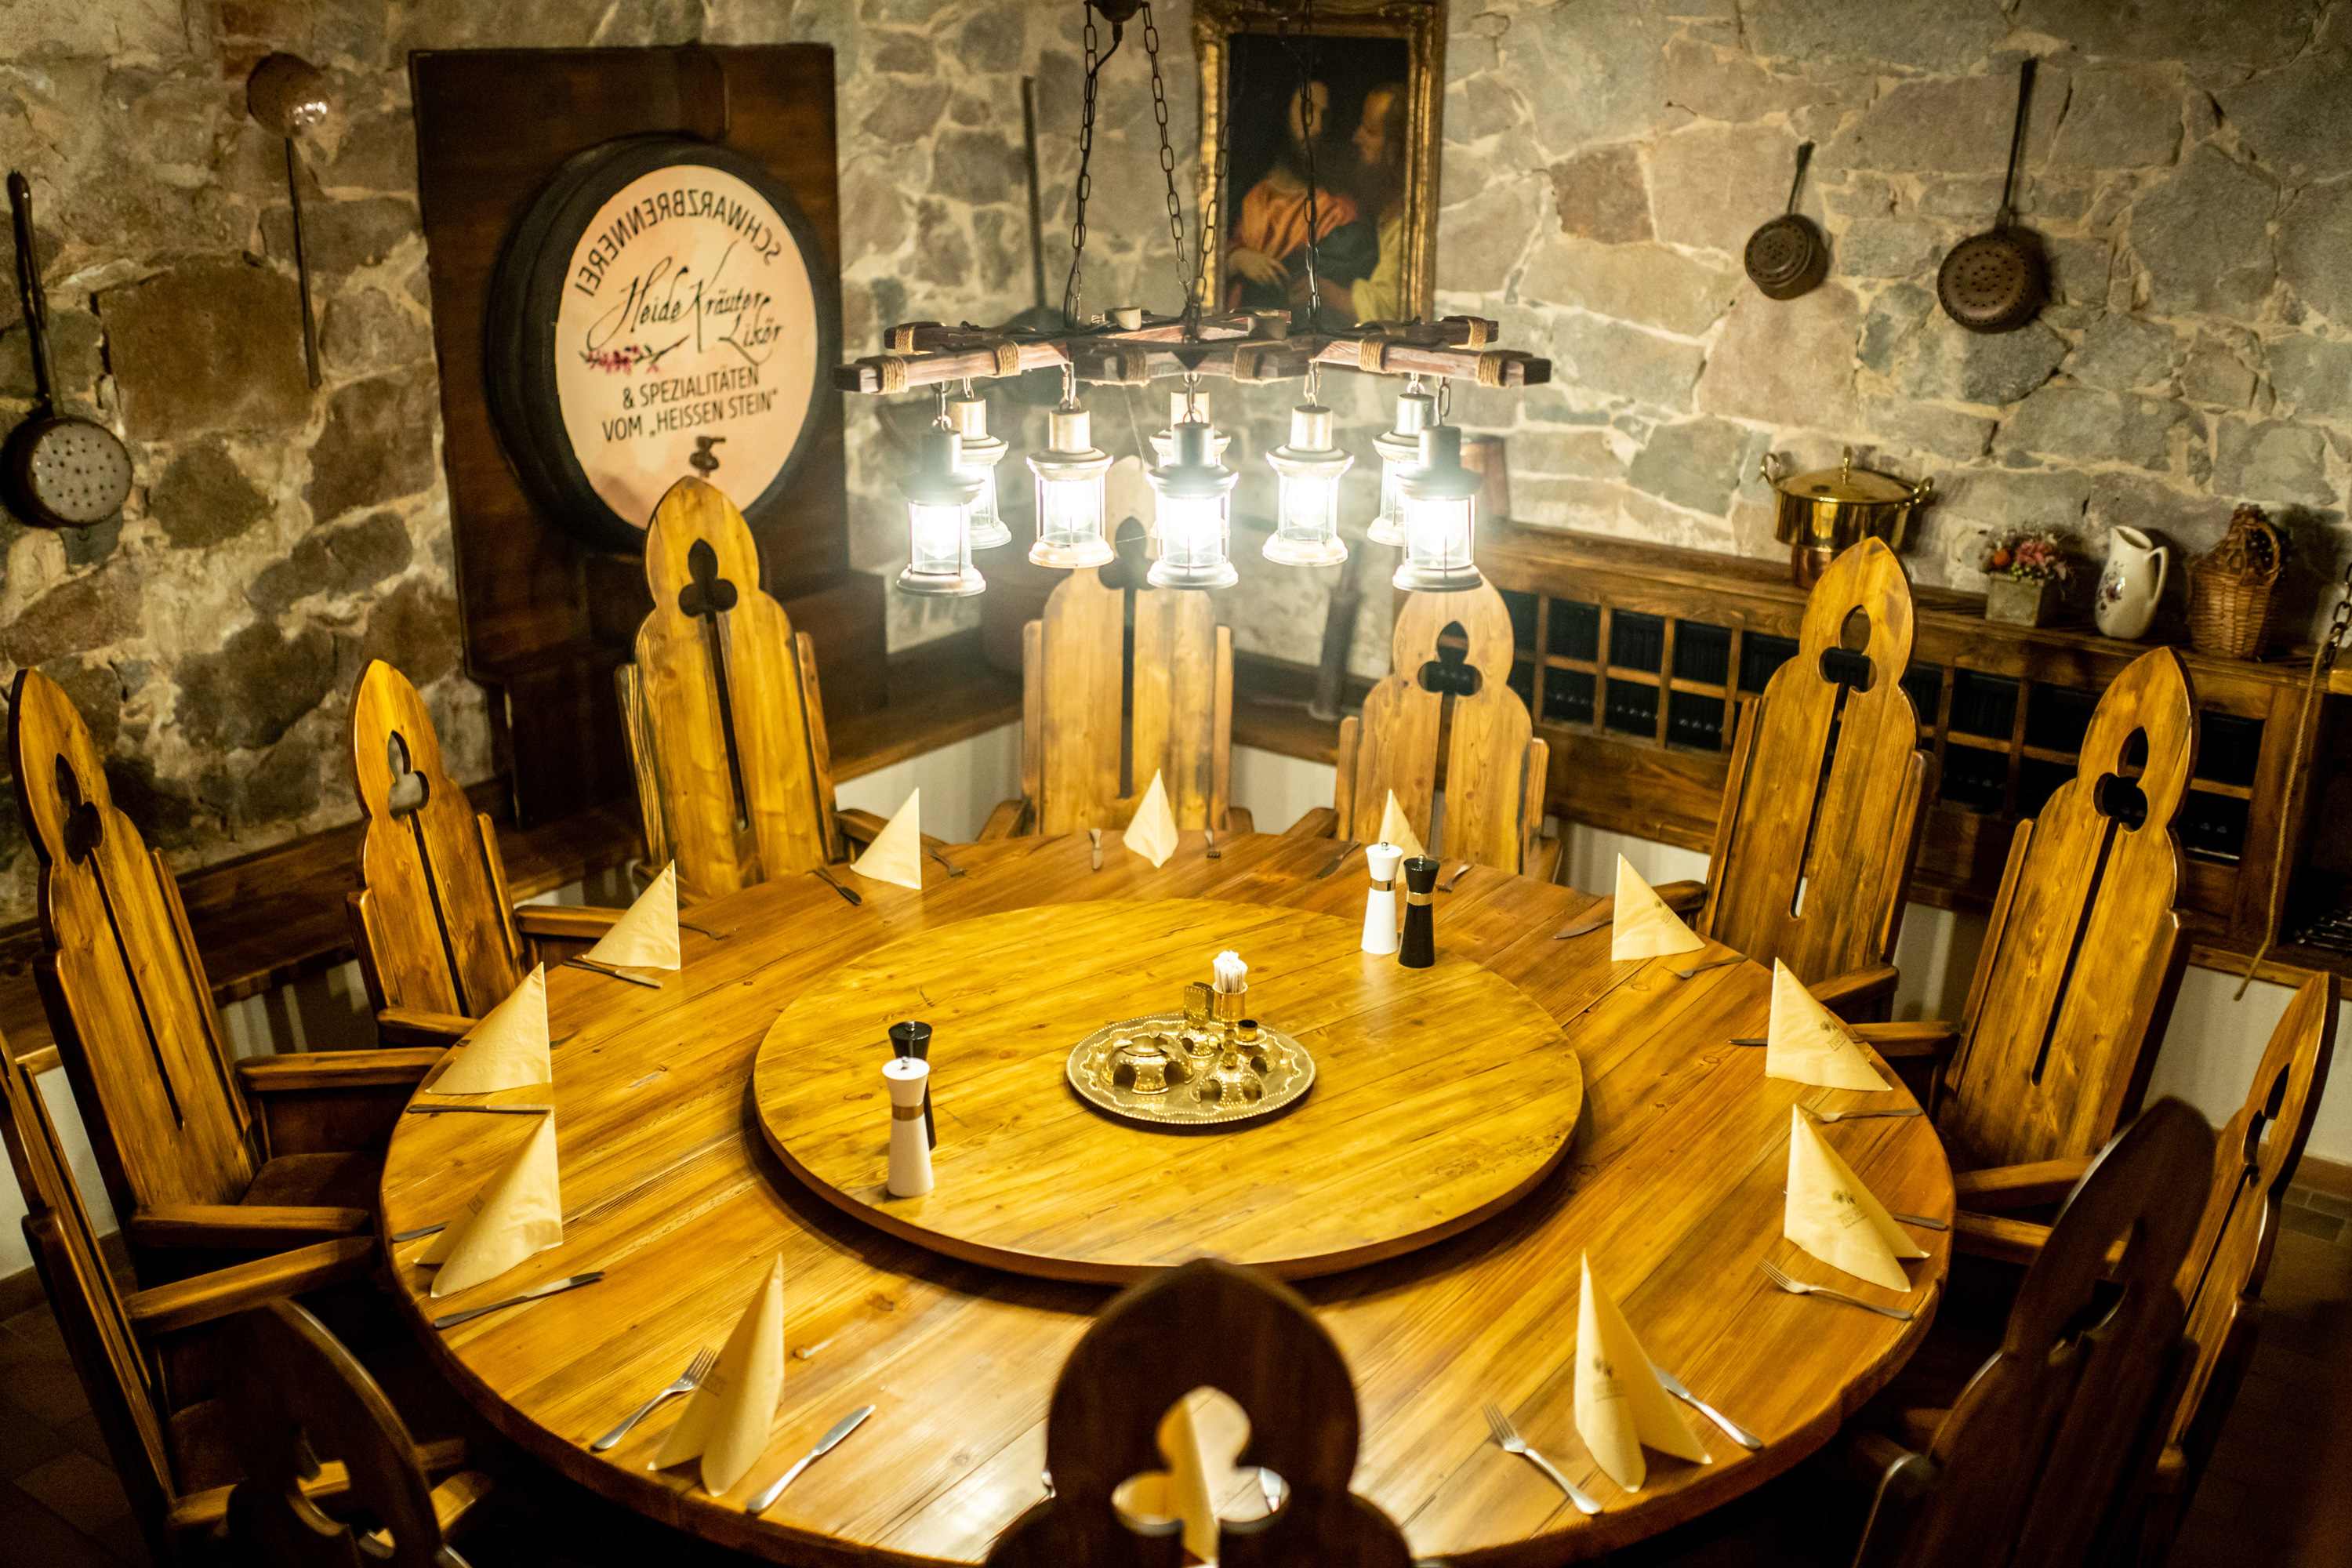 Rustic round dining table in cellar vault